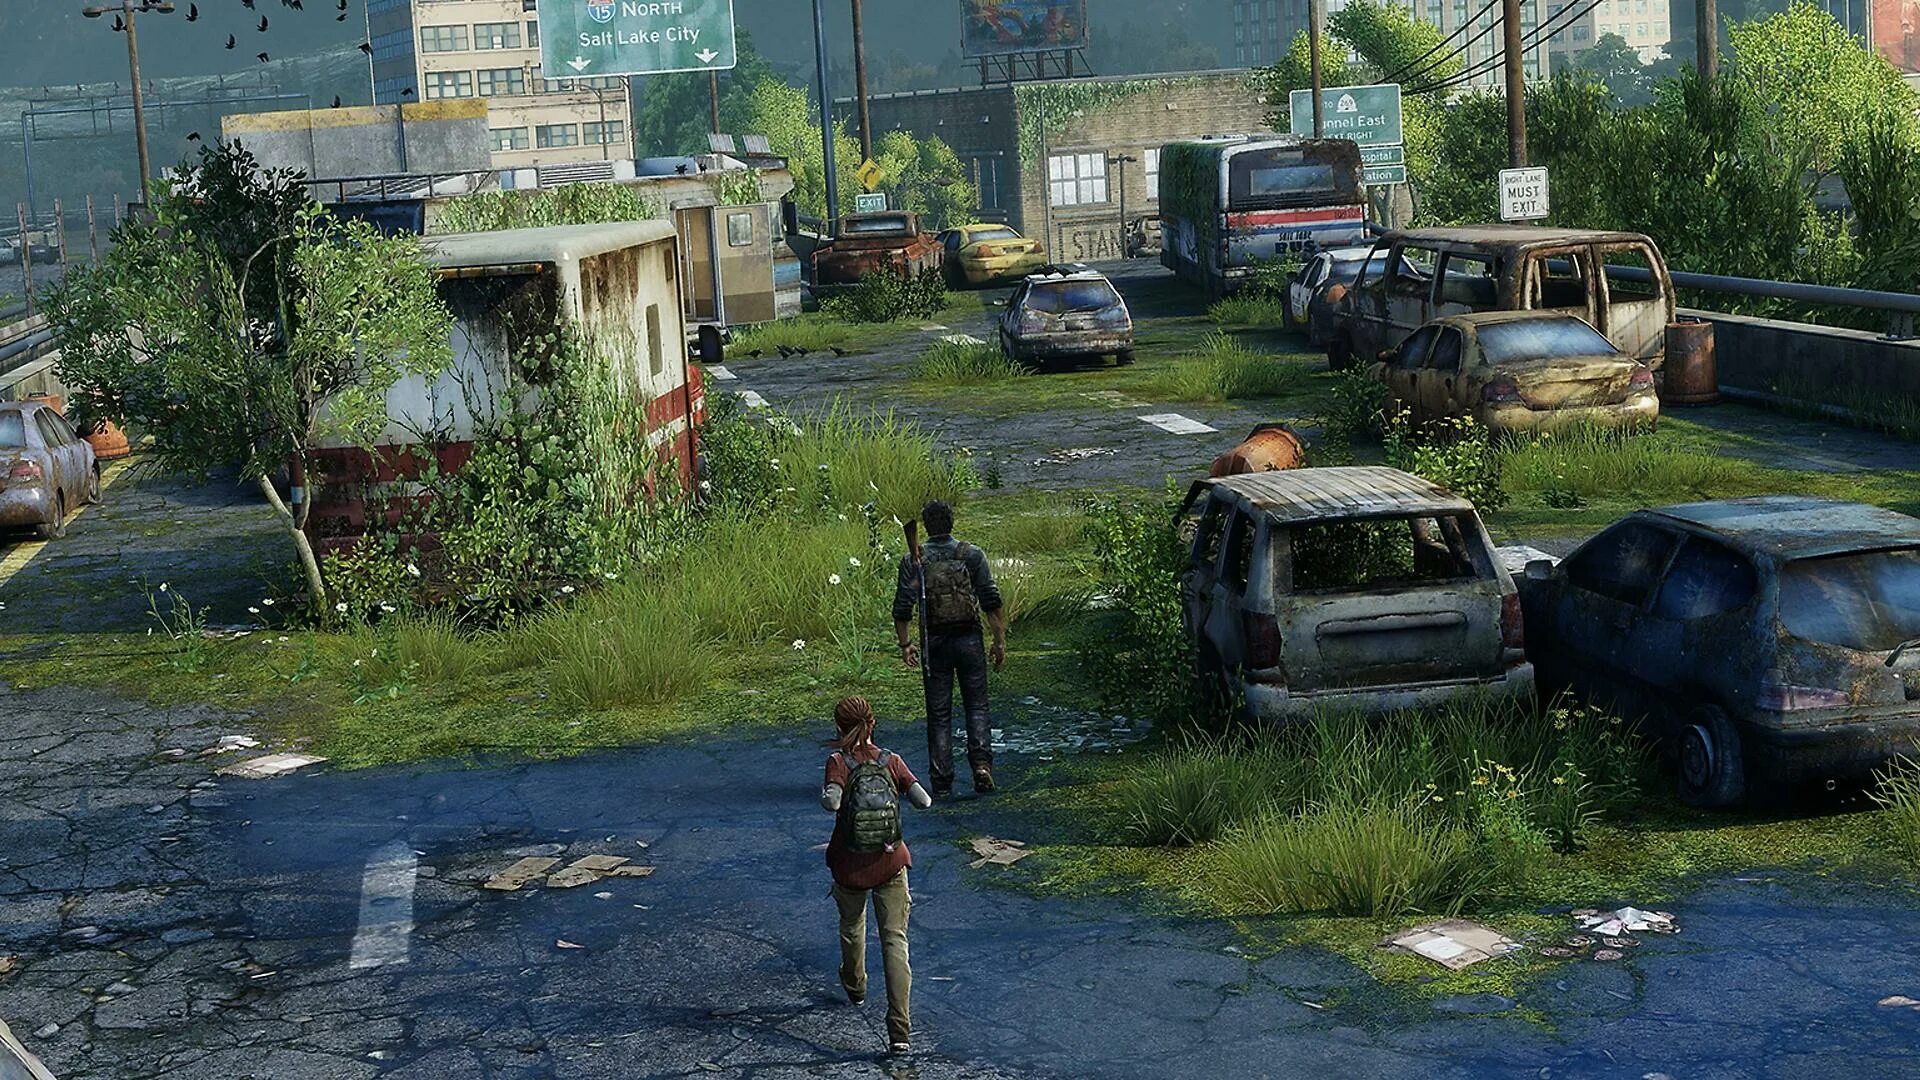 Town of us 3 3 2. The last of us 2 город. The last of us 1. The last of us игра.